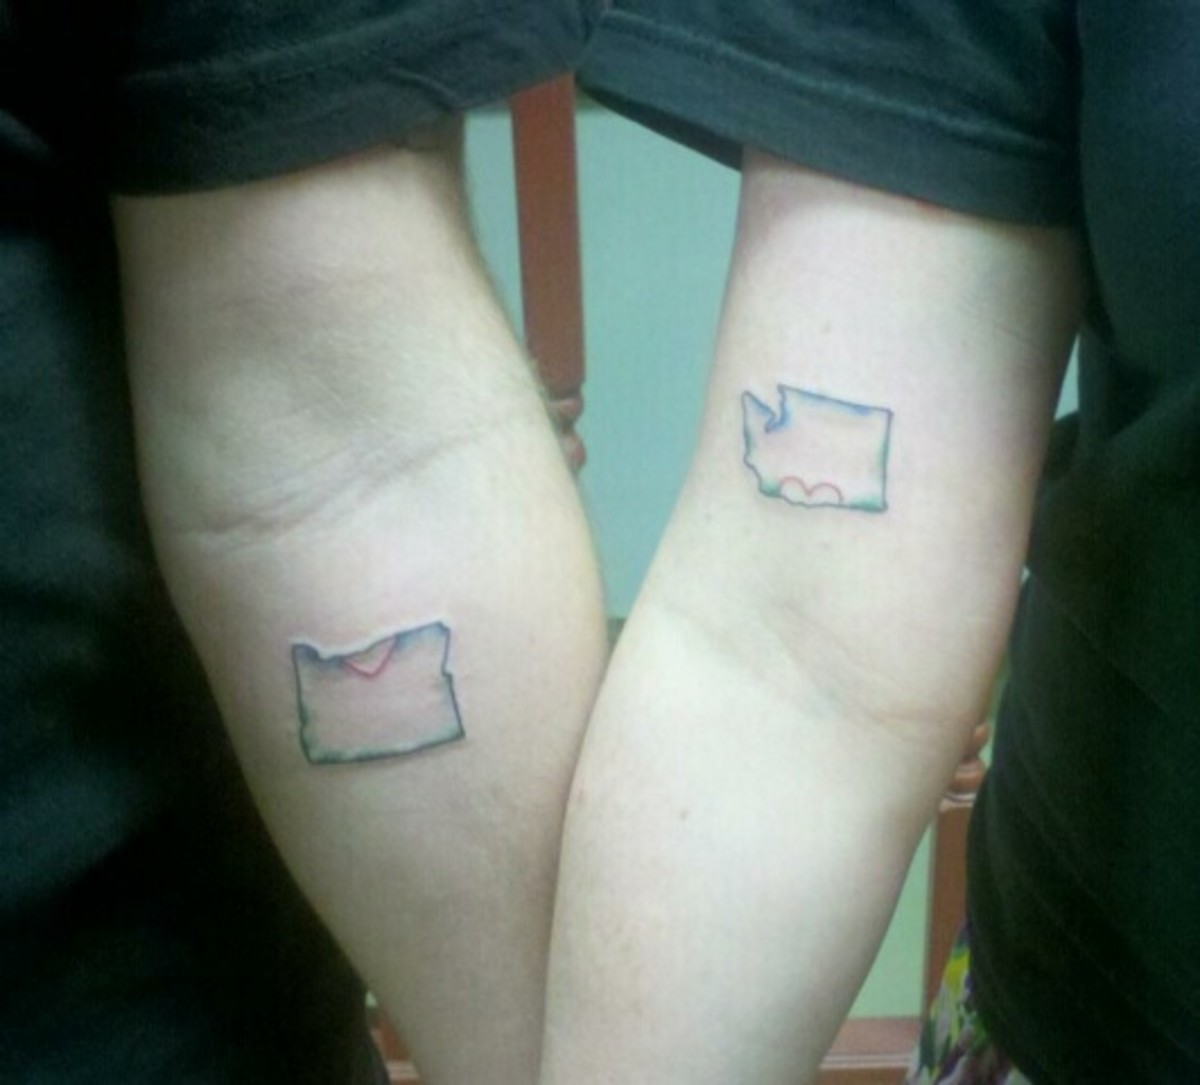 my wife and I got matching tattoos. i got the state of Oregon, with half a heart and she got the state of Washington, with the other half. The locations line up perfectly